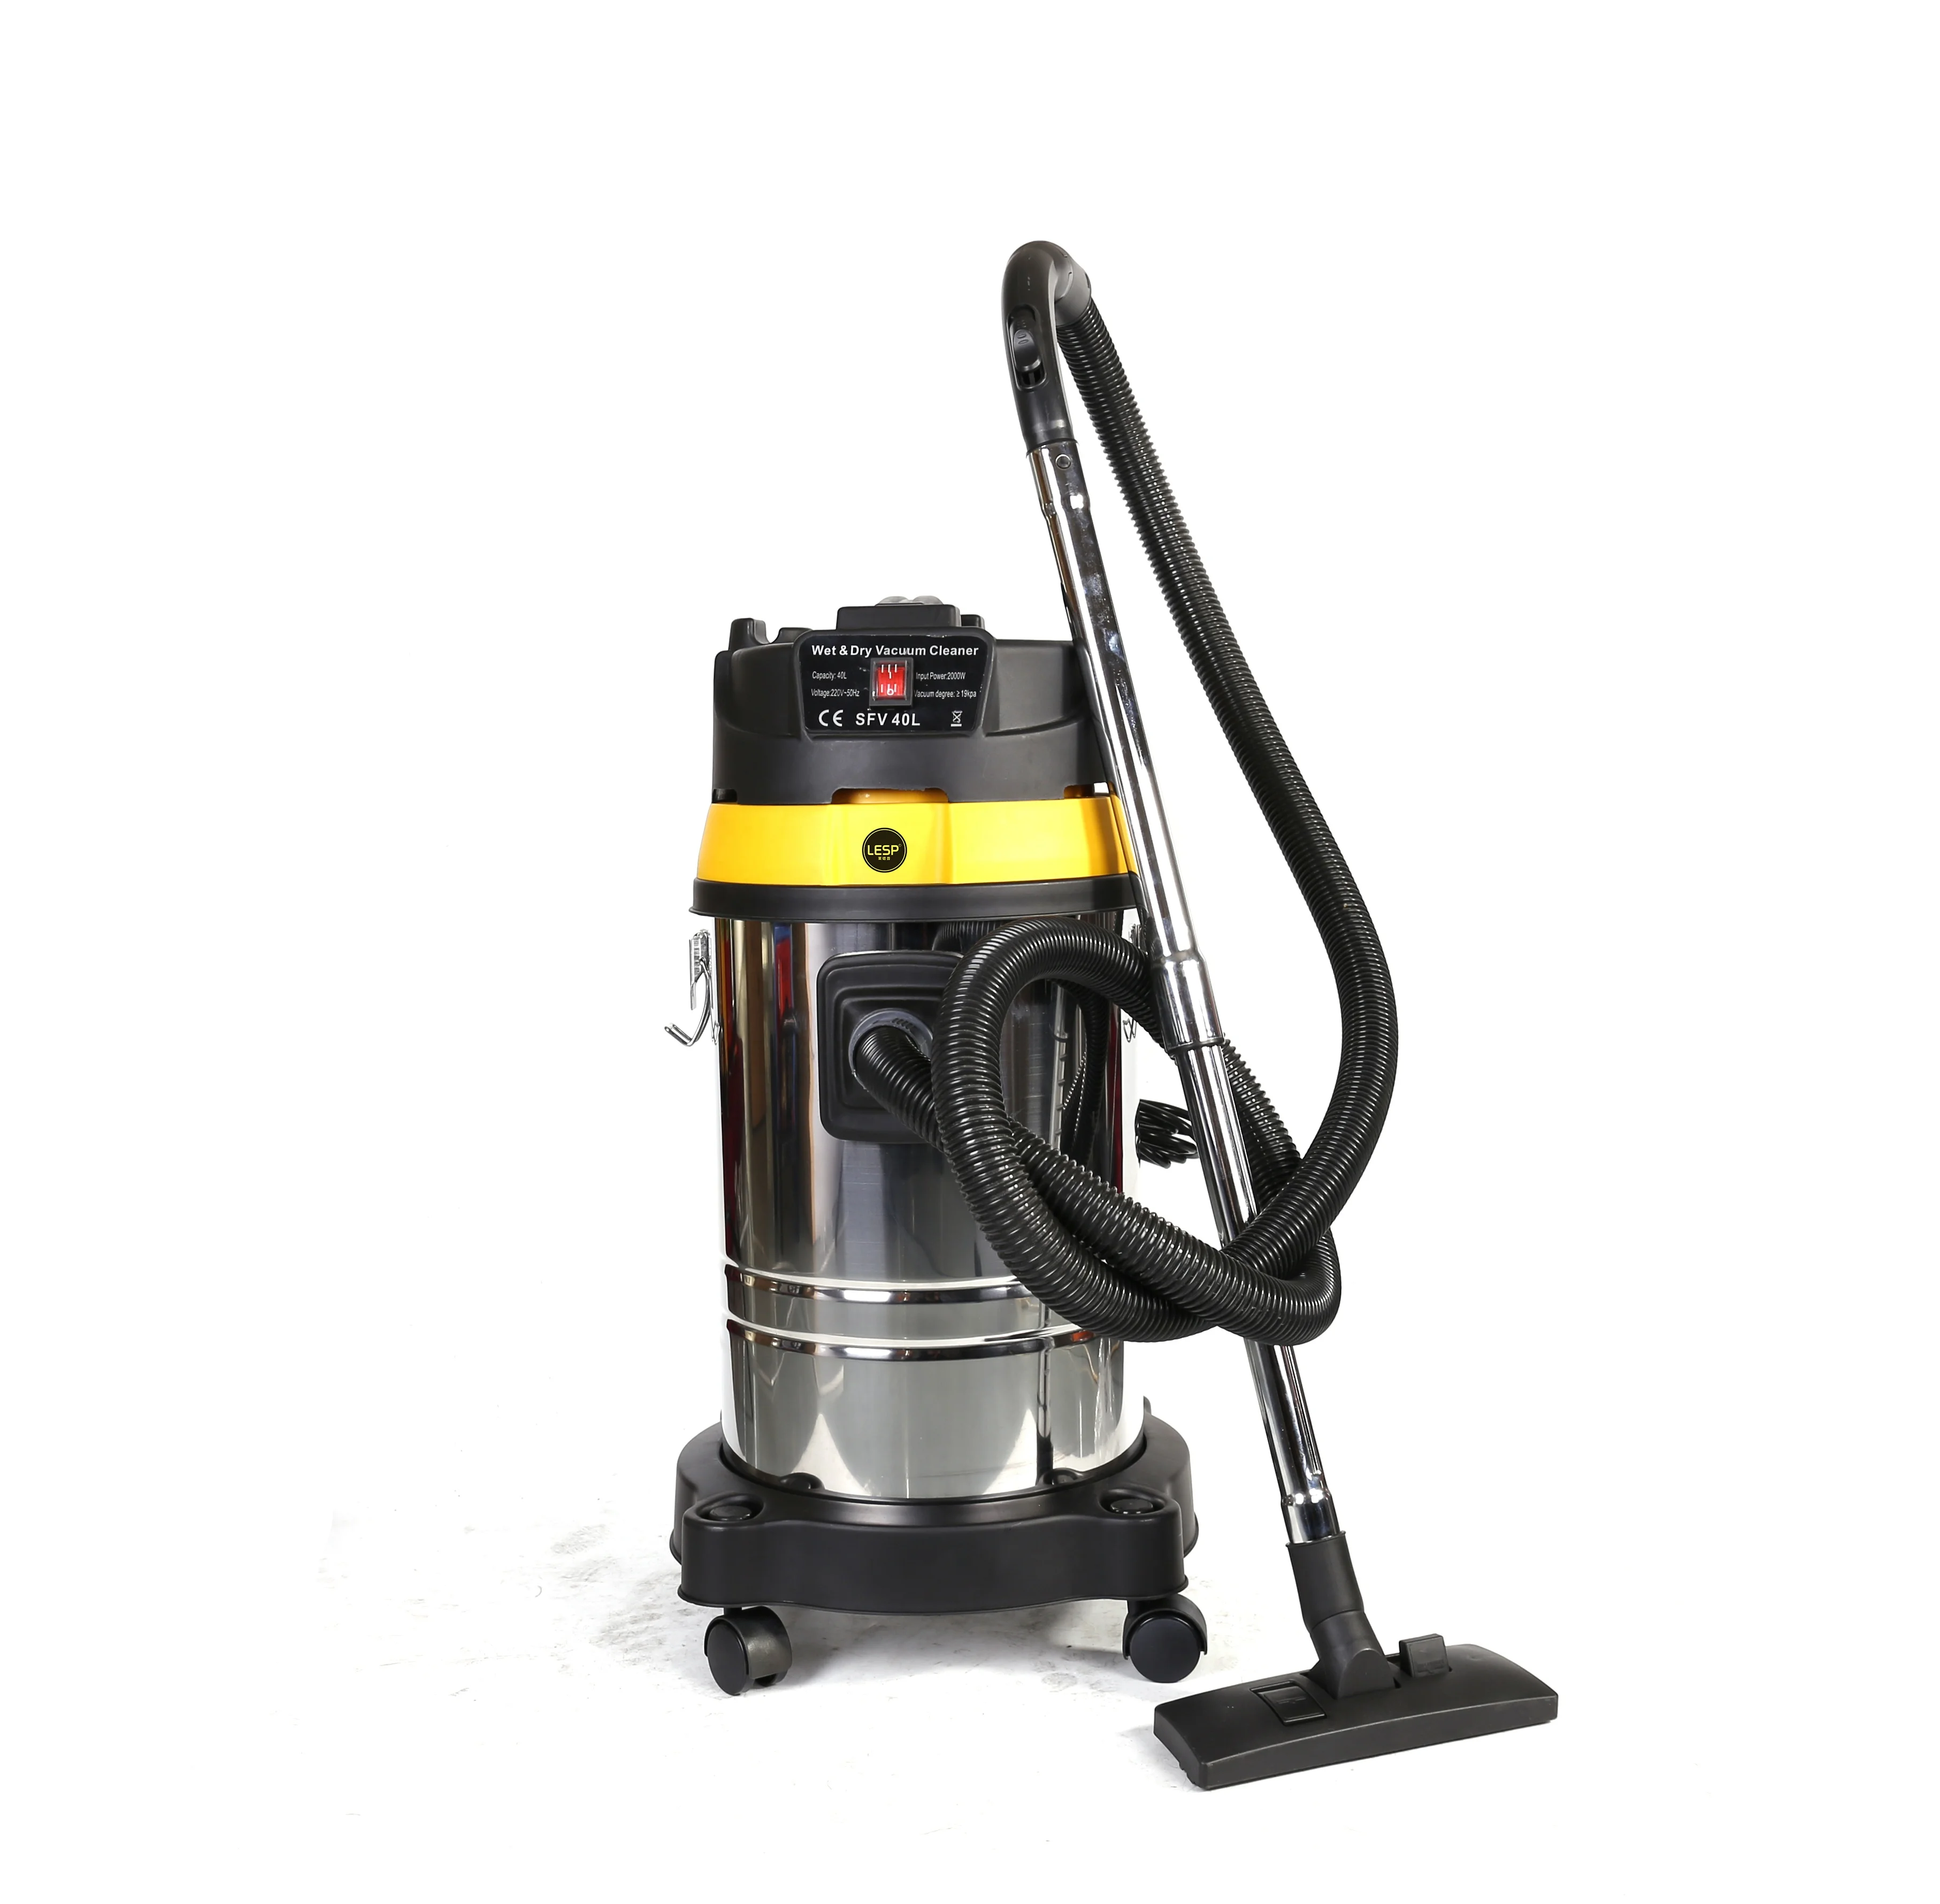 2021 hot sale with CE certificate easy to operate 40L JH-40L-C Vacuum Cleaner 2021 hot sale children